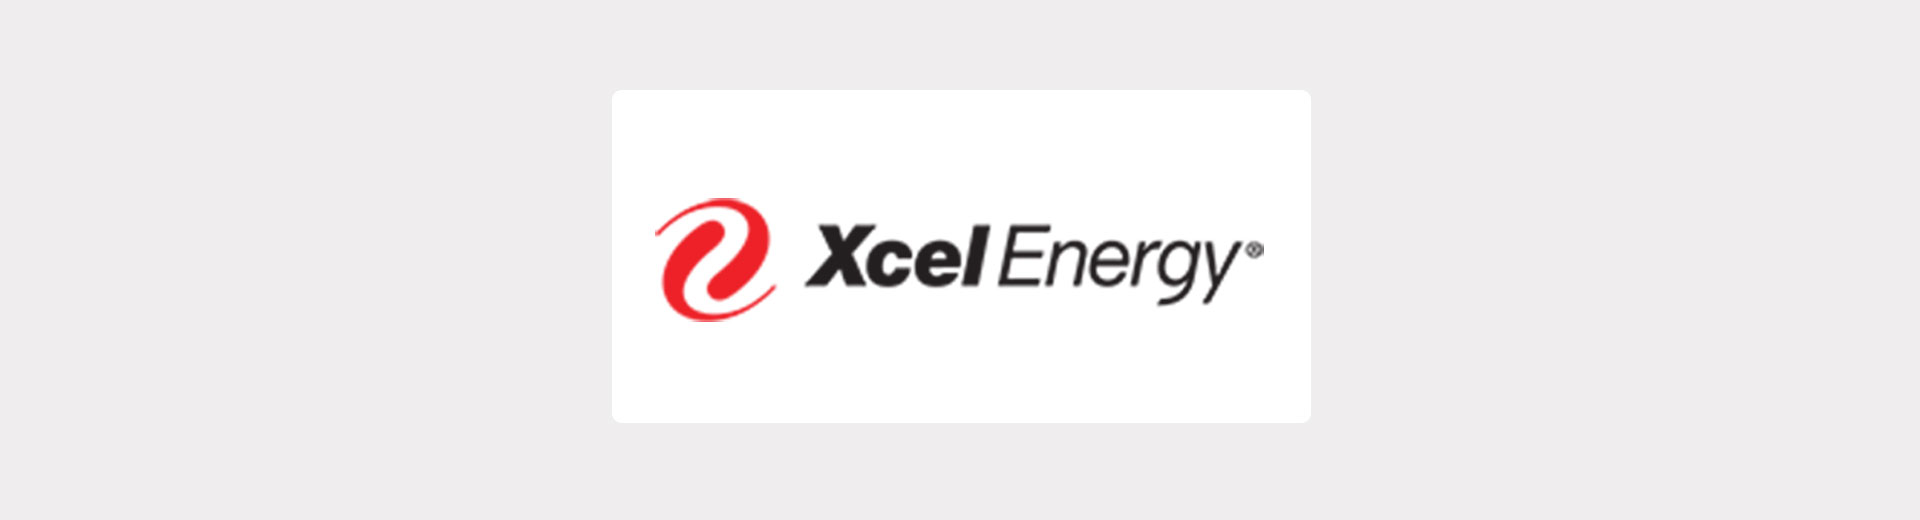 xcel-energy-s-new-electric-vehicle-vision-to-save-customers-billions